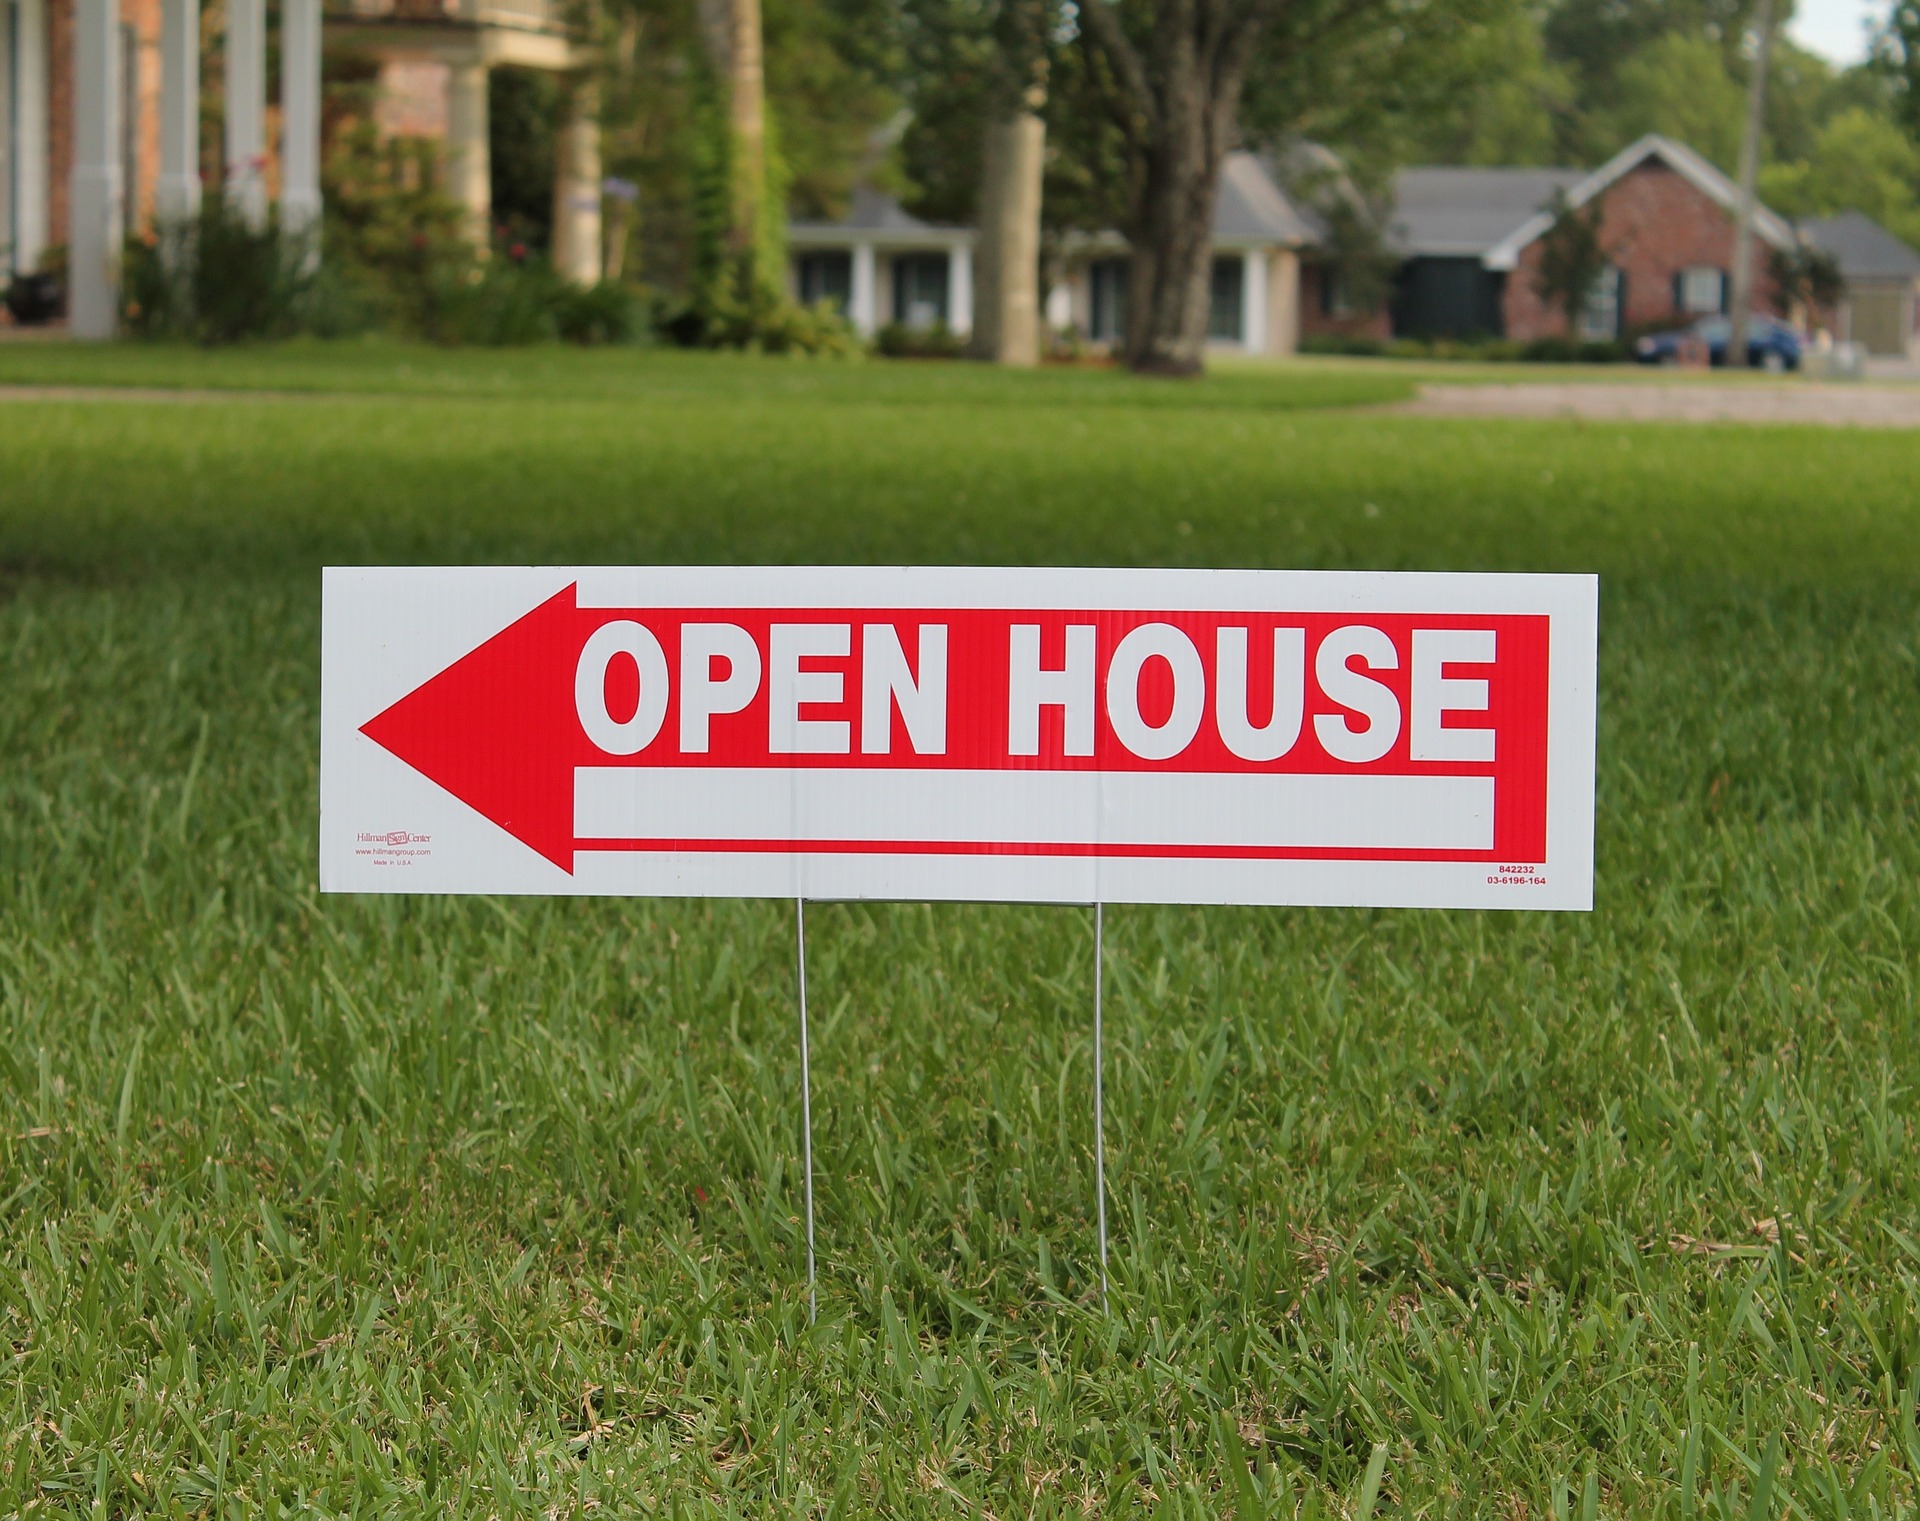 image_of_an_open_house_sign_on_a_lawn